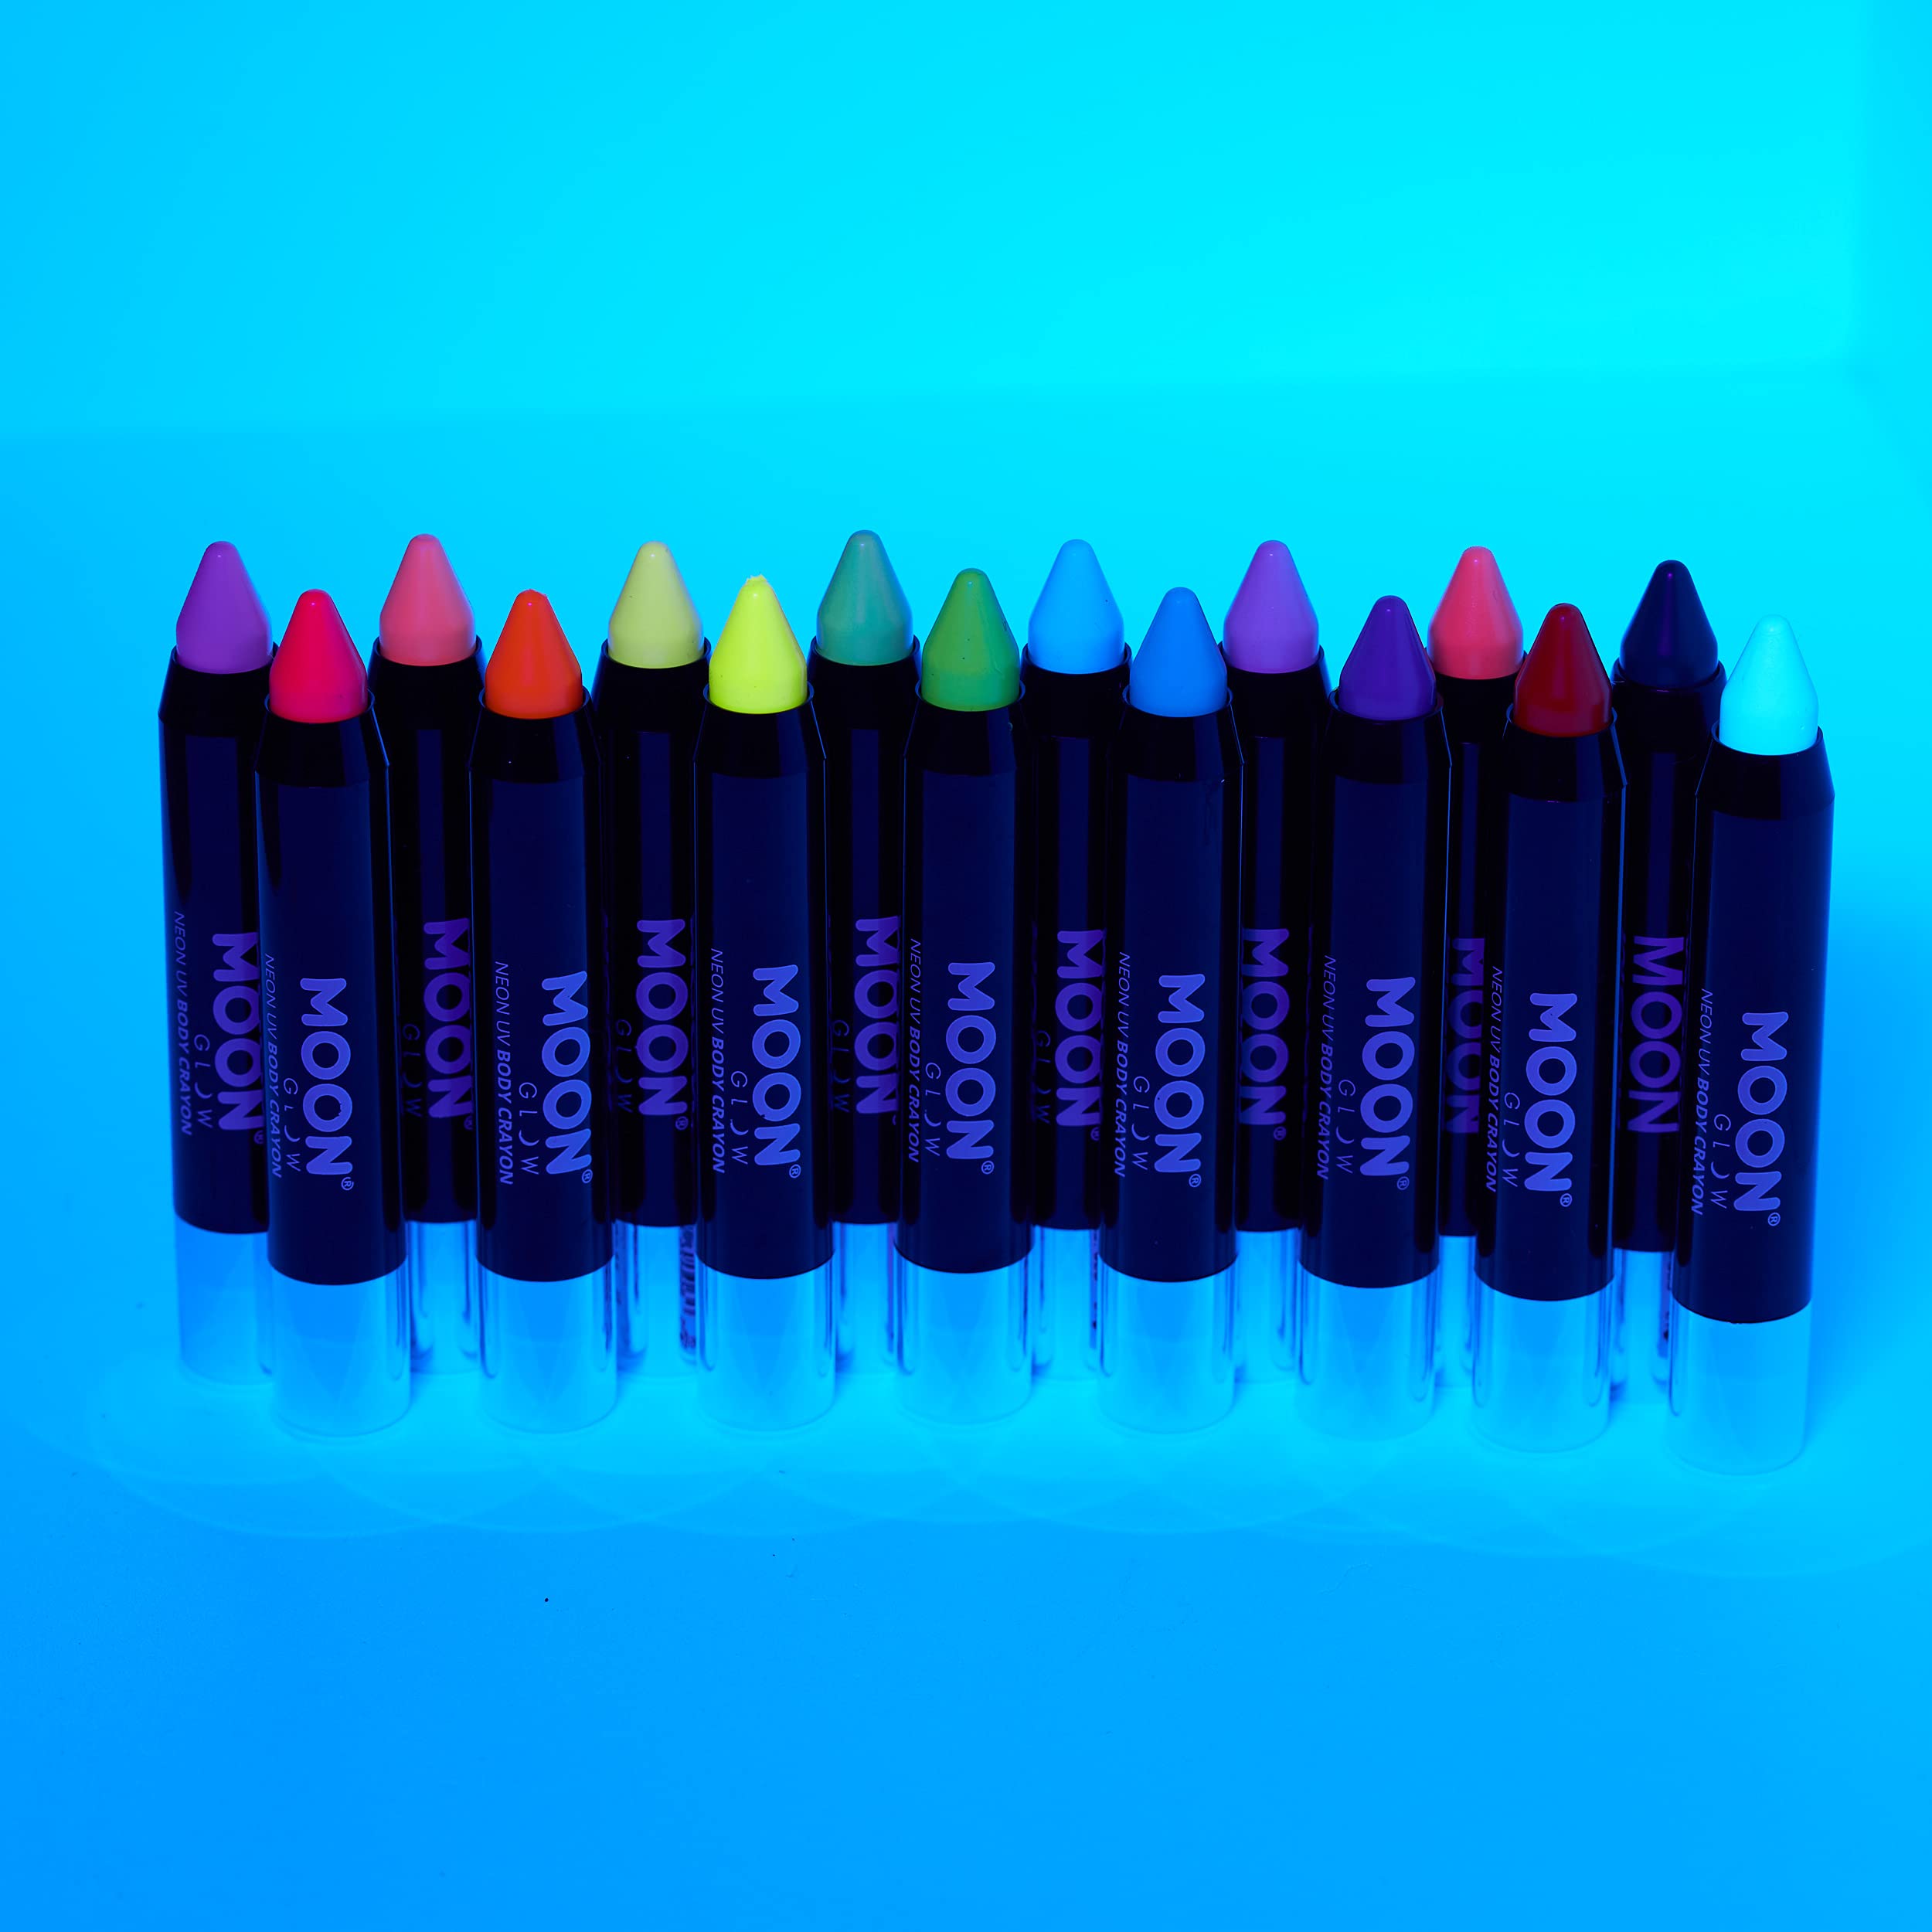 Moon Glow - Blacklight Neon Face Paint Stick/Body Crayon makeup for the Face & Body - Pastel & Intense set of 16 colours - Glows brightly under blacklights